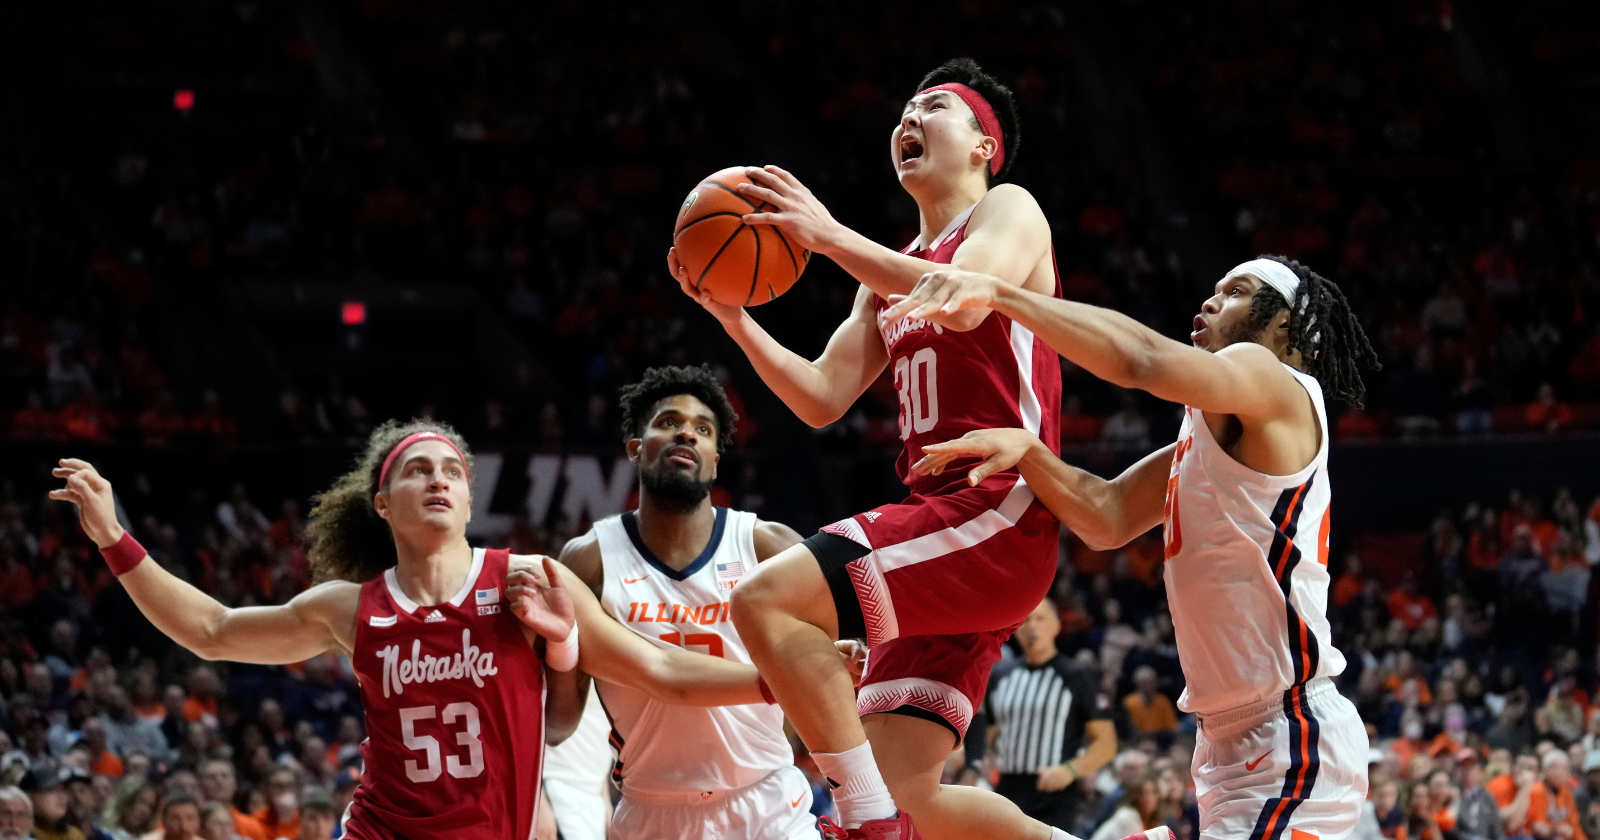 Nebraska erases double-digit deficit, but comes up short in overtime loss to No. 14 Illinois